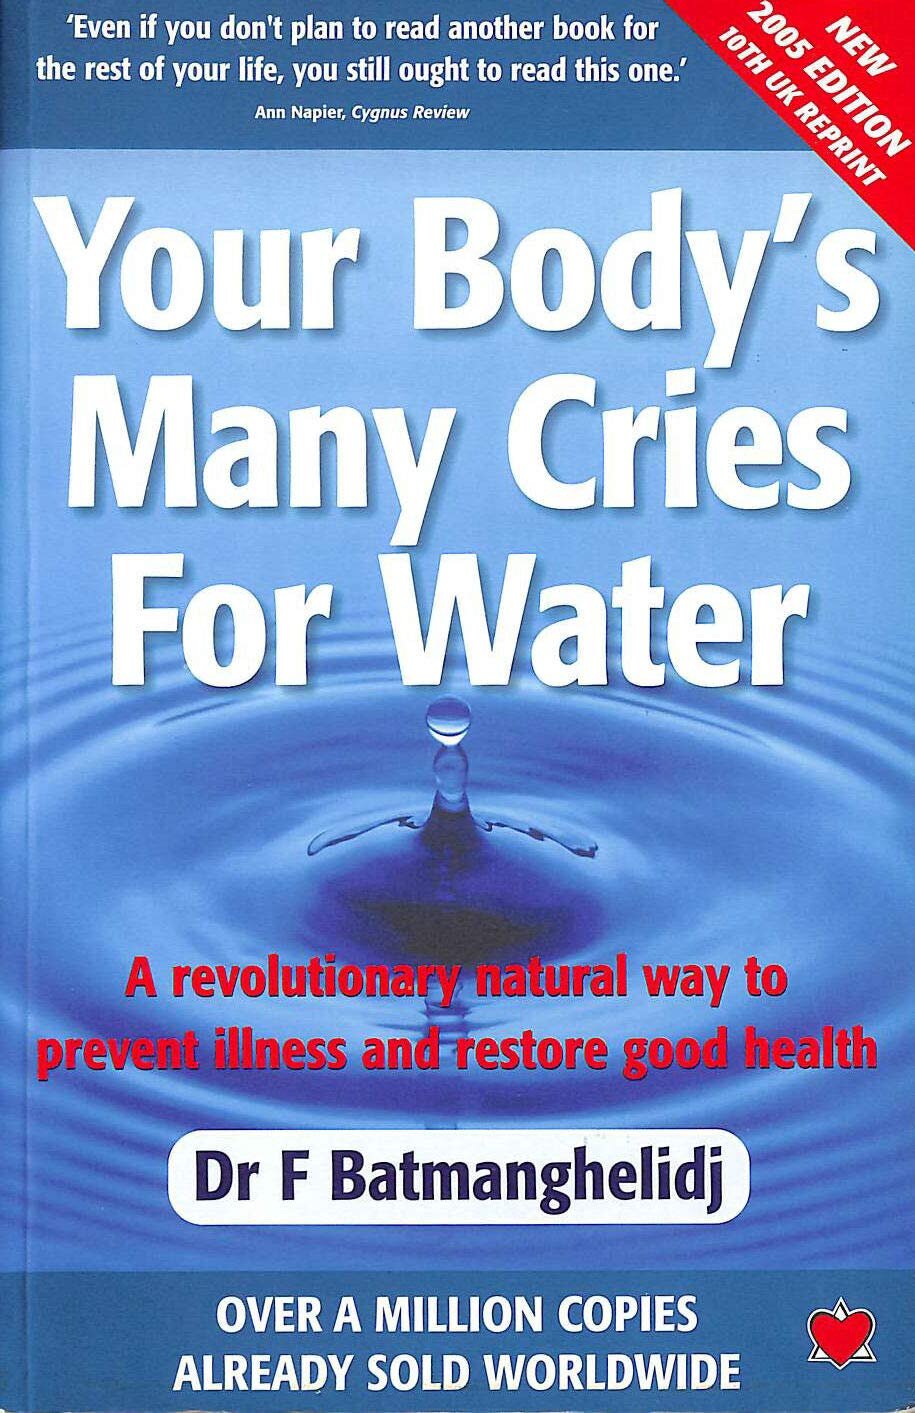 Your Body's Many Cries for Water.jpg